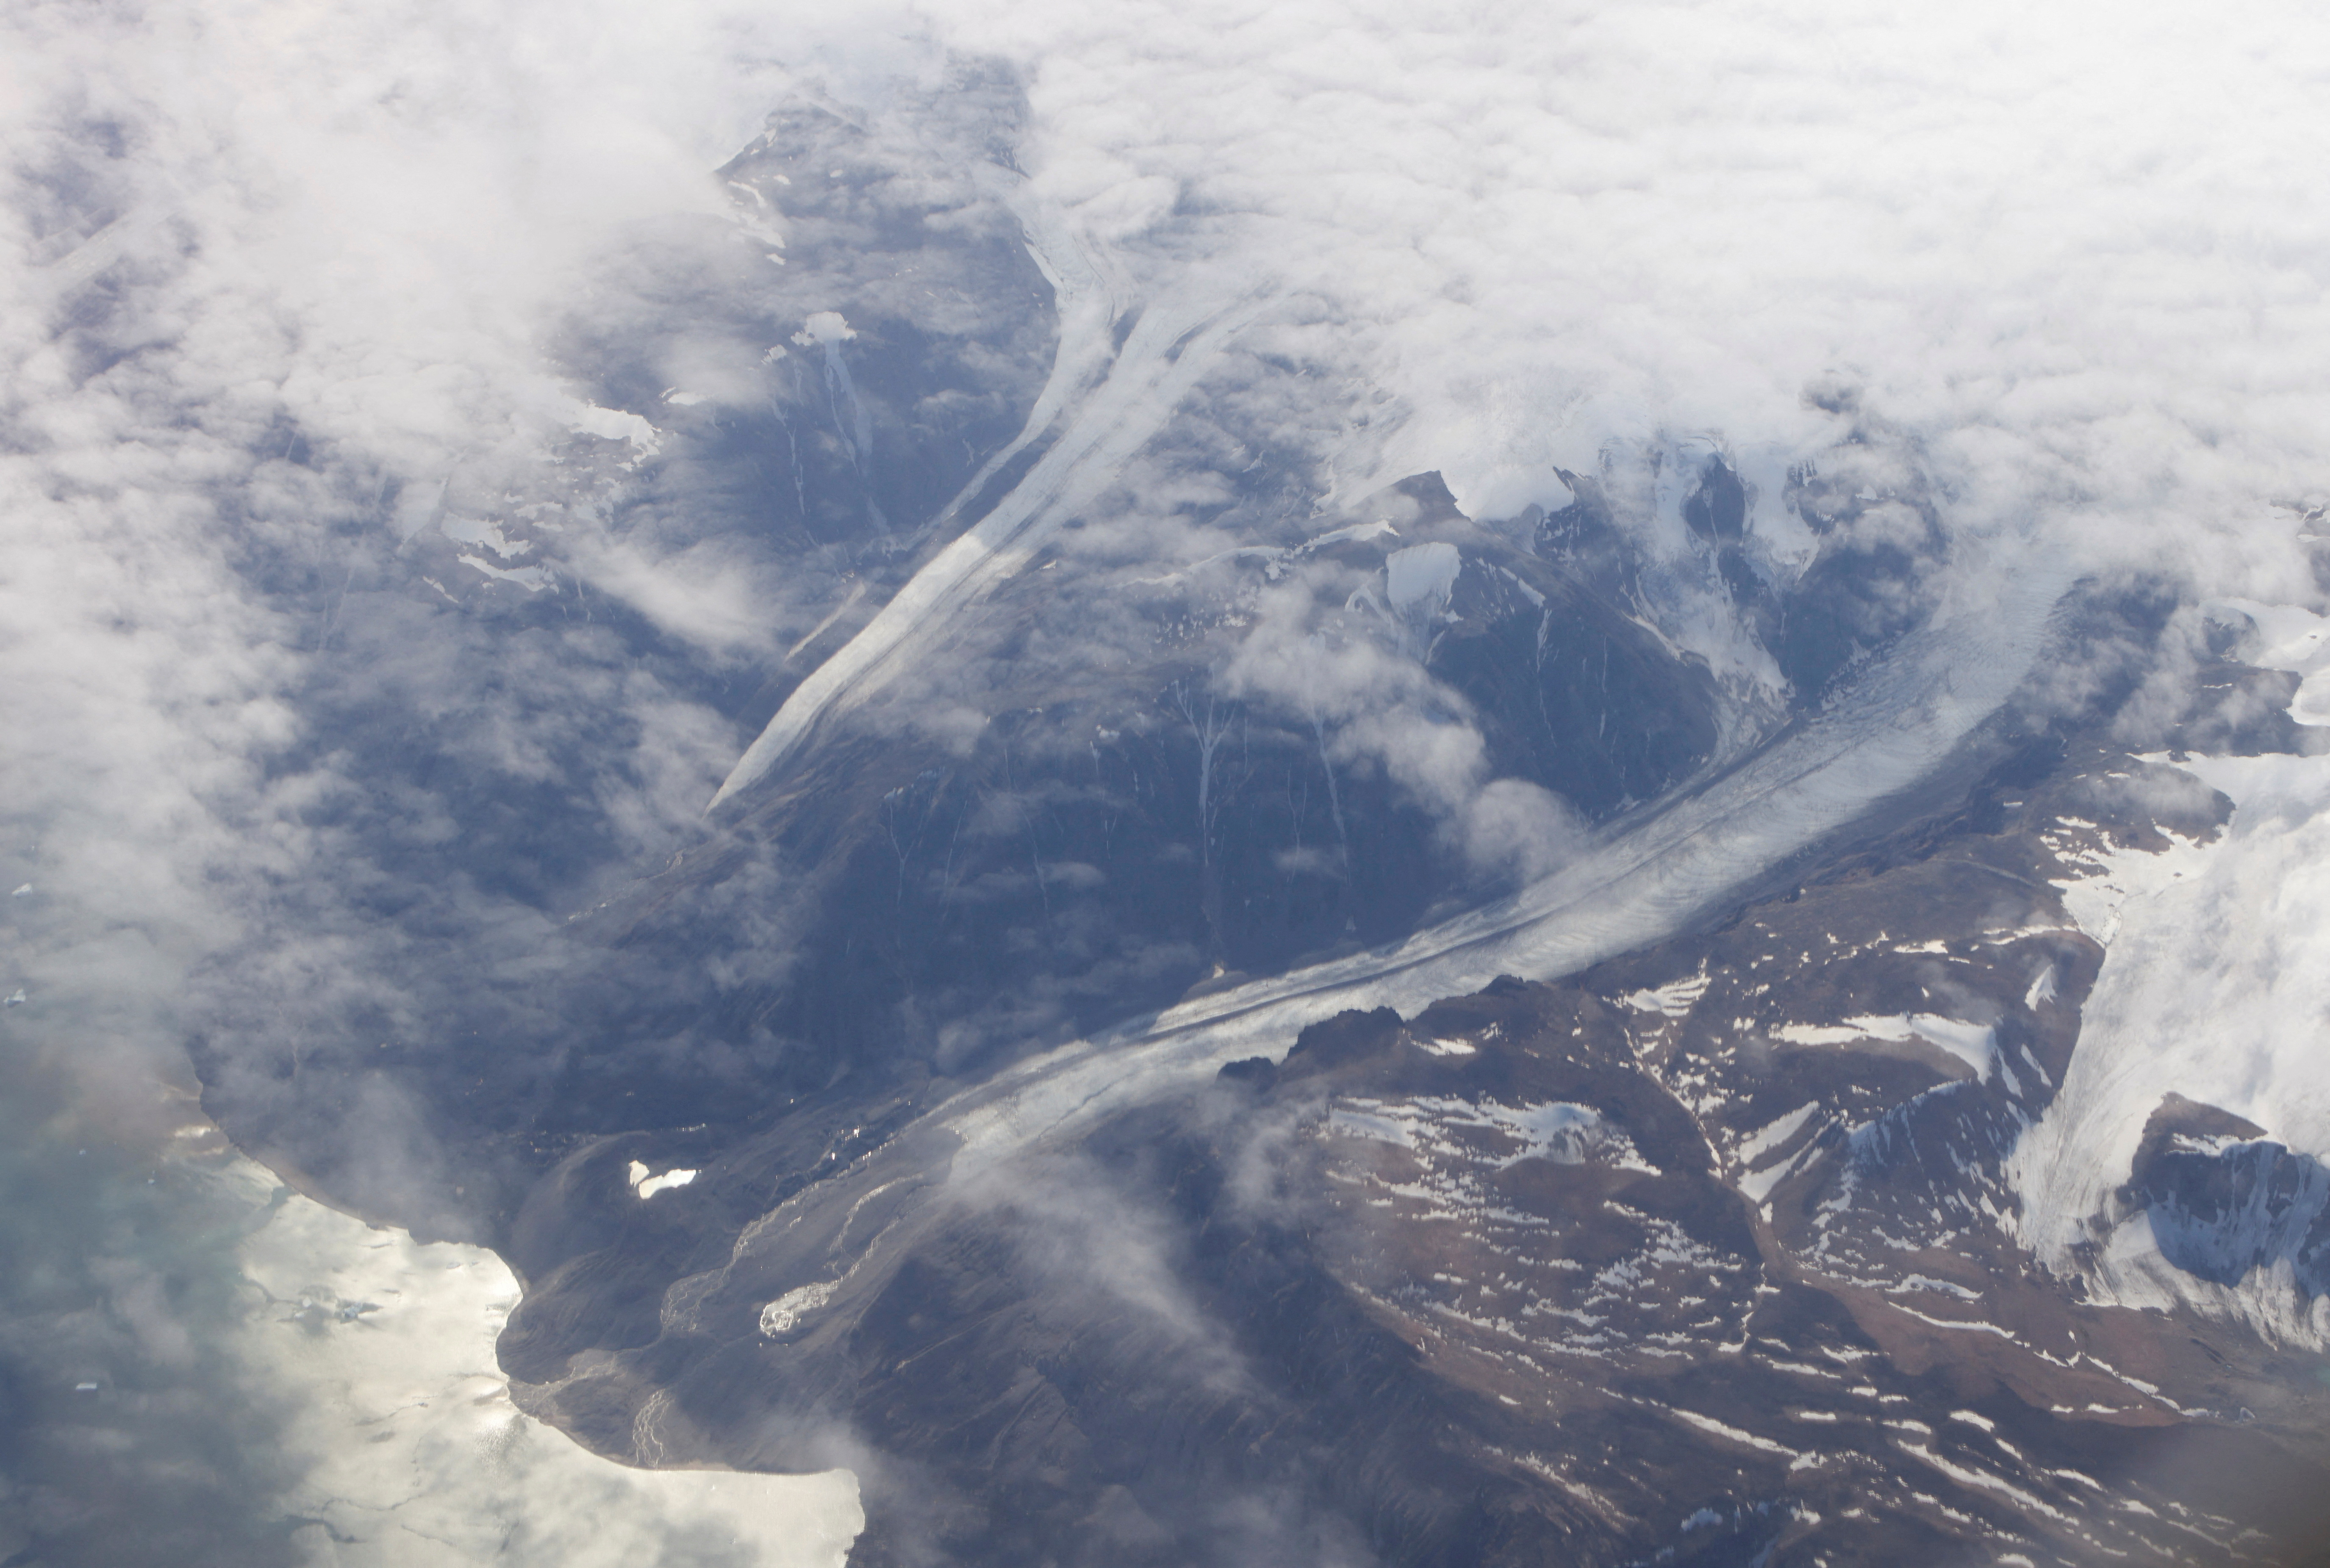 Valleys cut by glaciers of the Greenland Ice Sheet along the mountains of Greenland